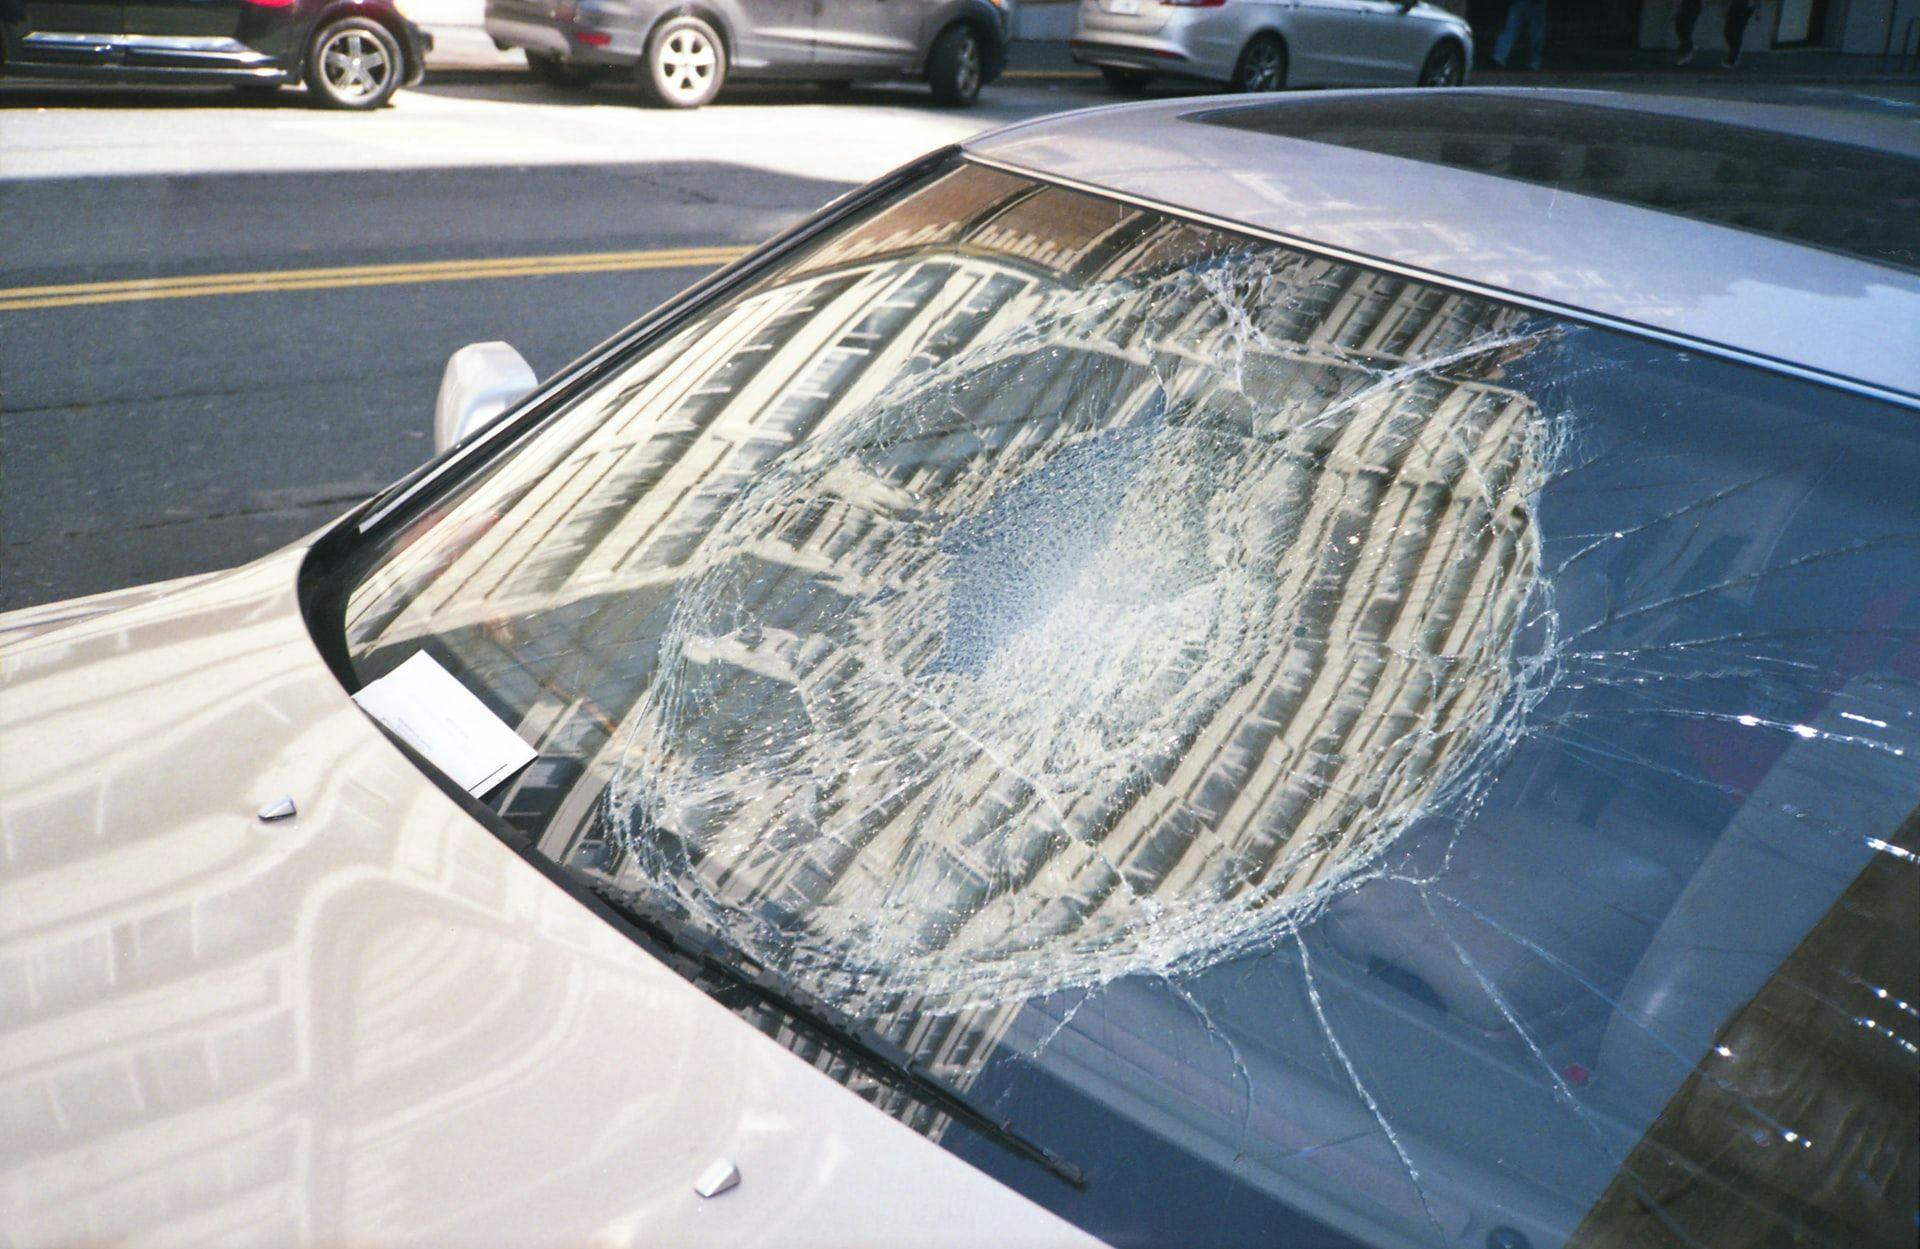 A 1000 euro reward for information about vandals who damaged 12 parked cars in Mersch